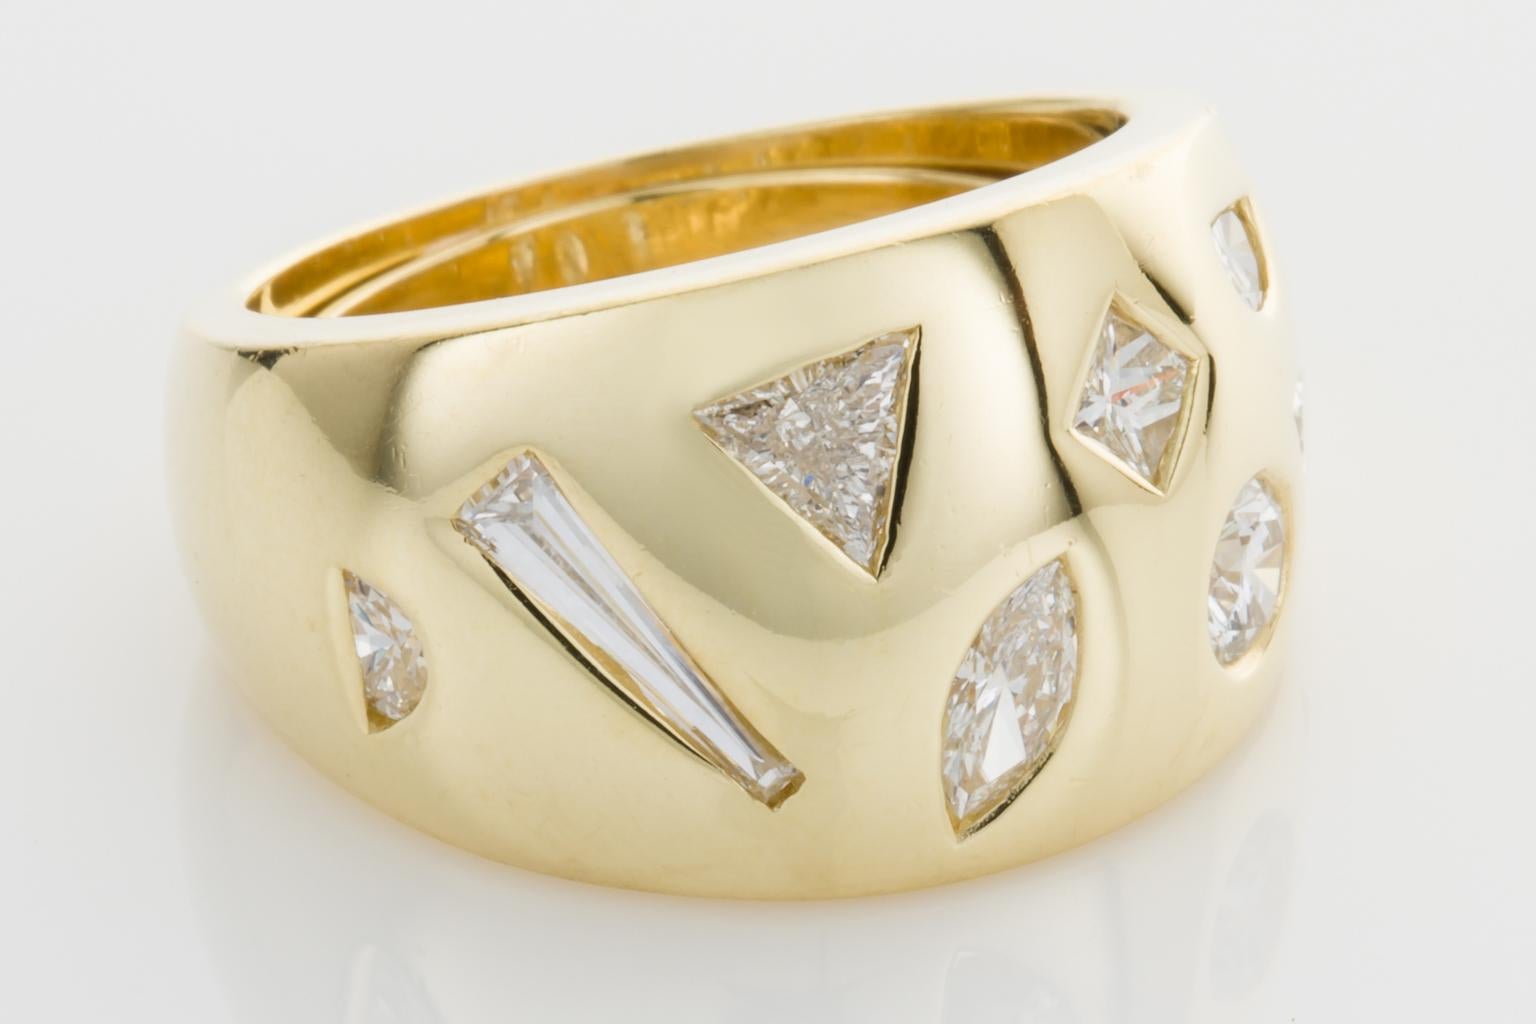 Bold and Beautiful, this 18k Yellow gold ring sits perfectly on the finger.  It's striking with 8 diamonds of multi-cut design, allowing light and sparkle to spread in all directions.  Set with approximately 1.40cts of diamonds, a pear cut, a half